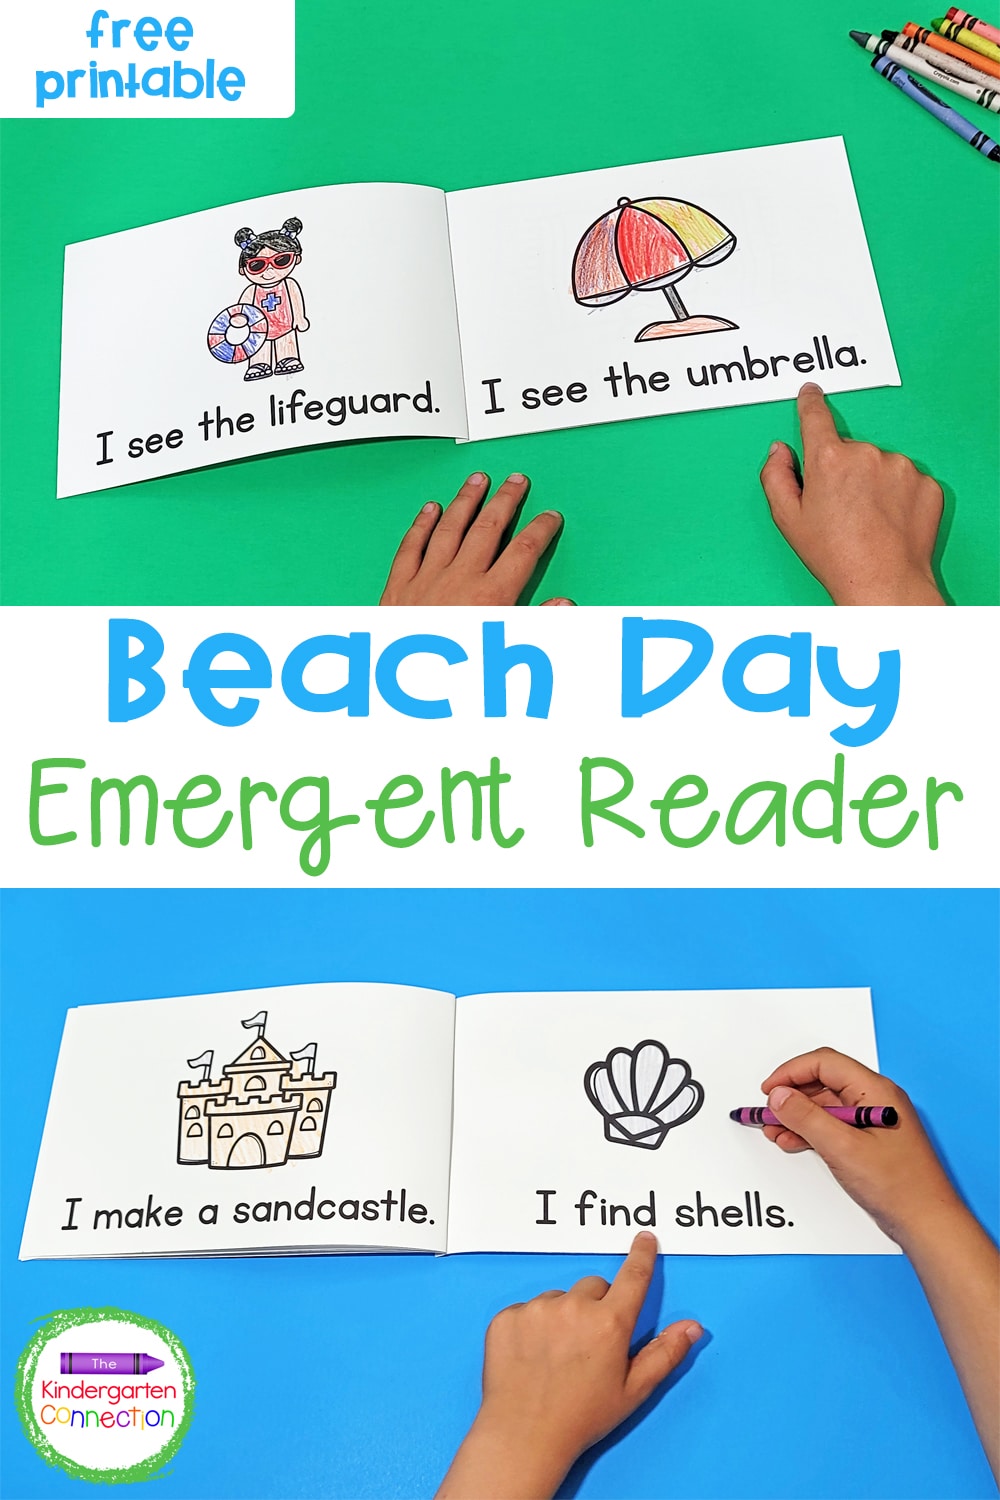 This free "Ready for a Beach Day" printable emergent reader will help you keep fluency skills sharp over break while making it fun!